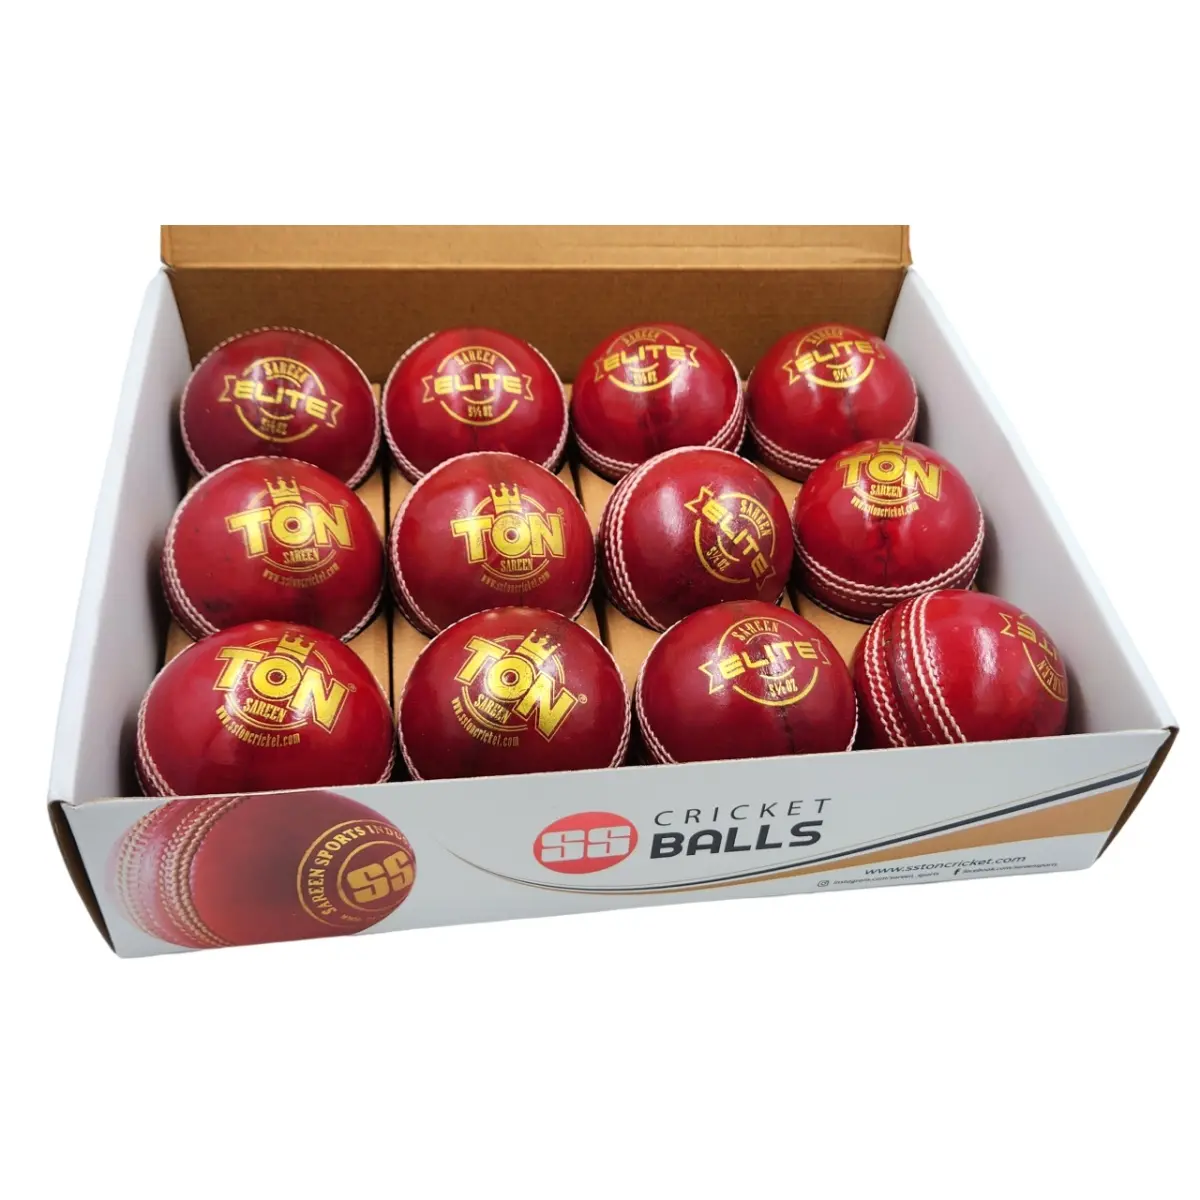 Buy SS Ton Elite Cricket Balls, Pack of 12 - Sportsuncle